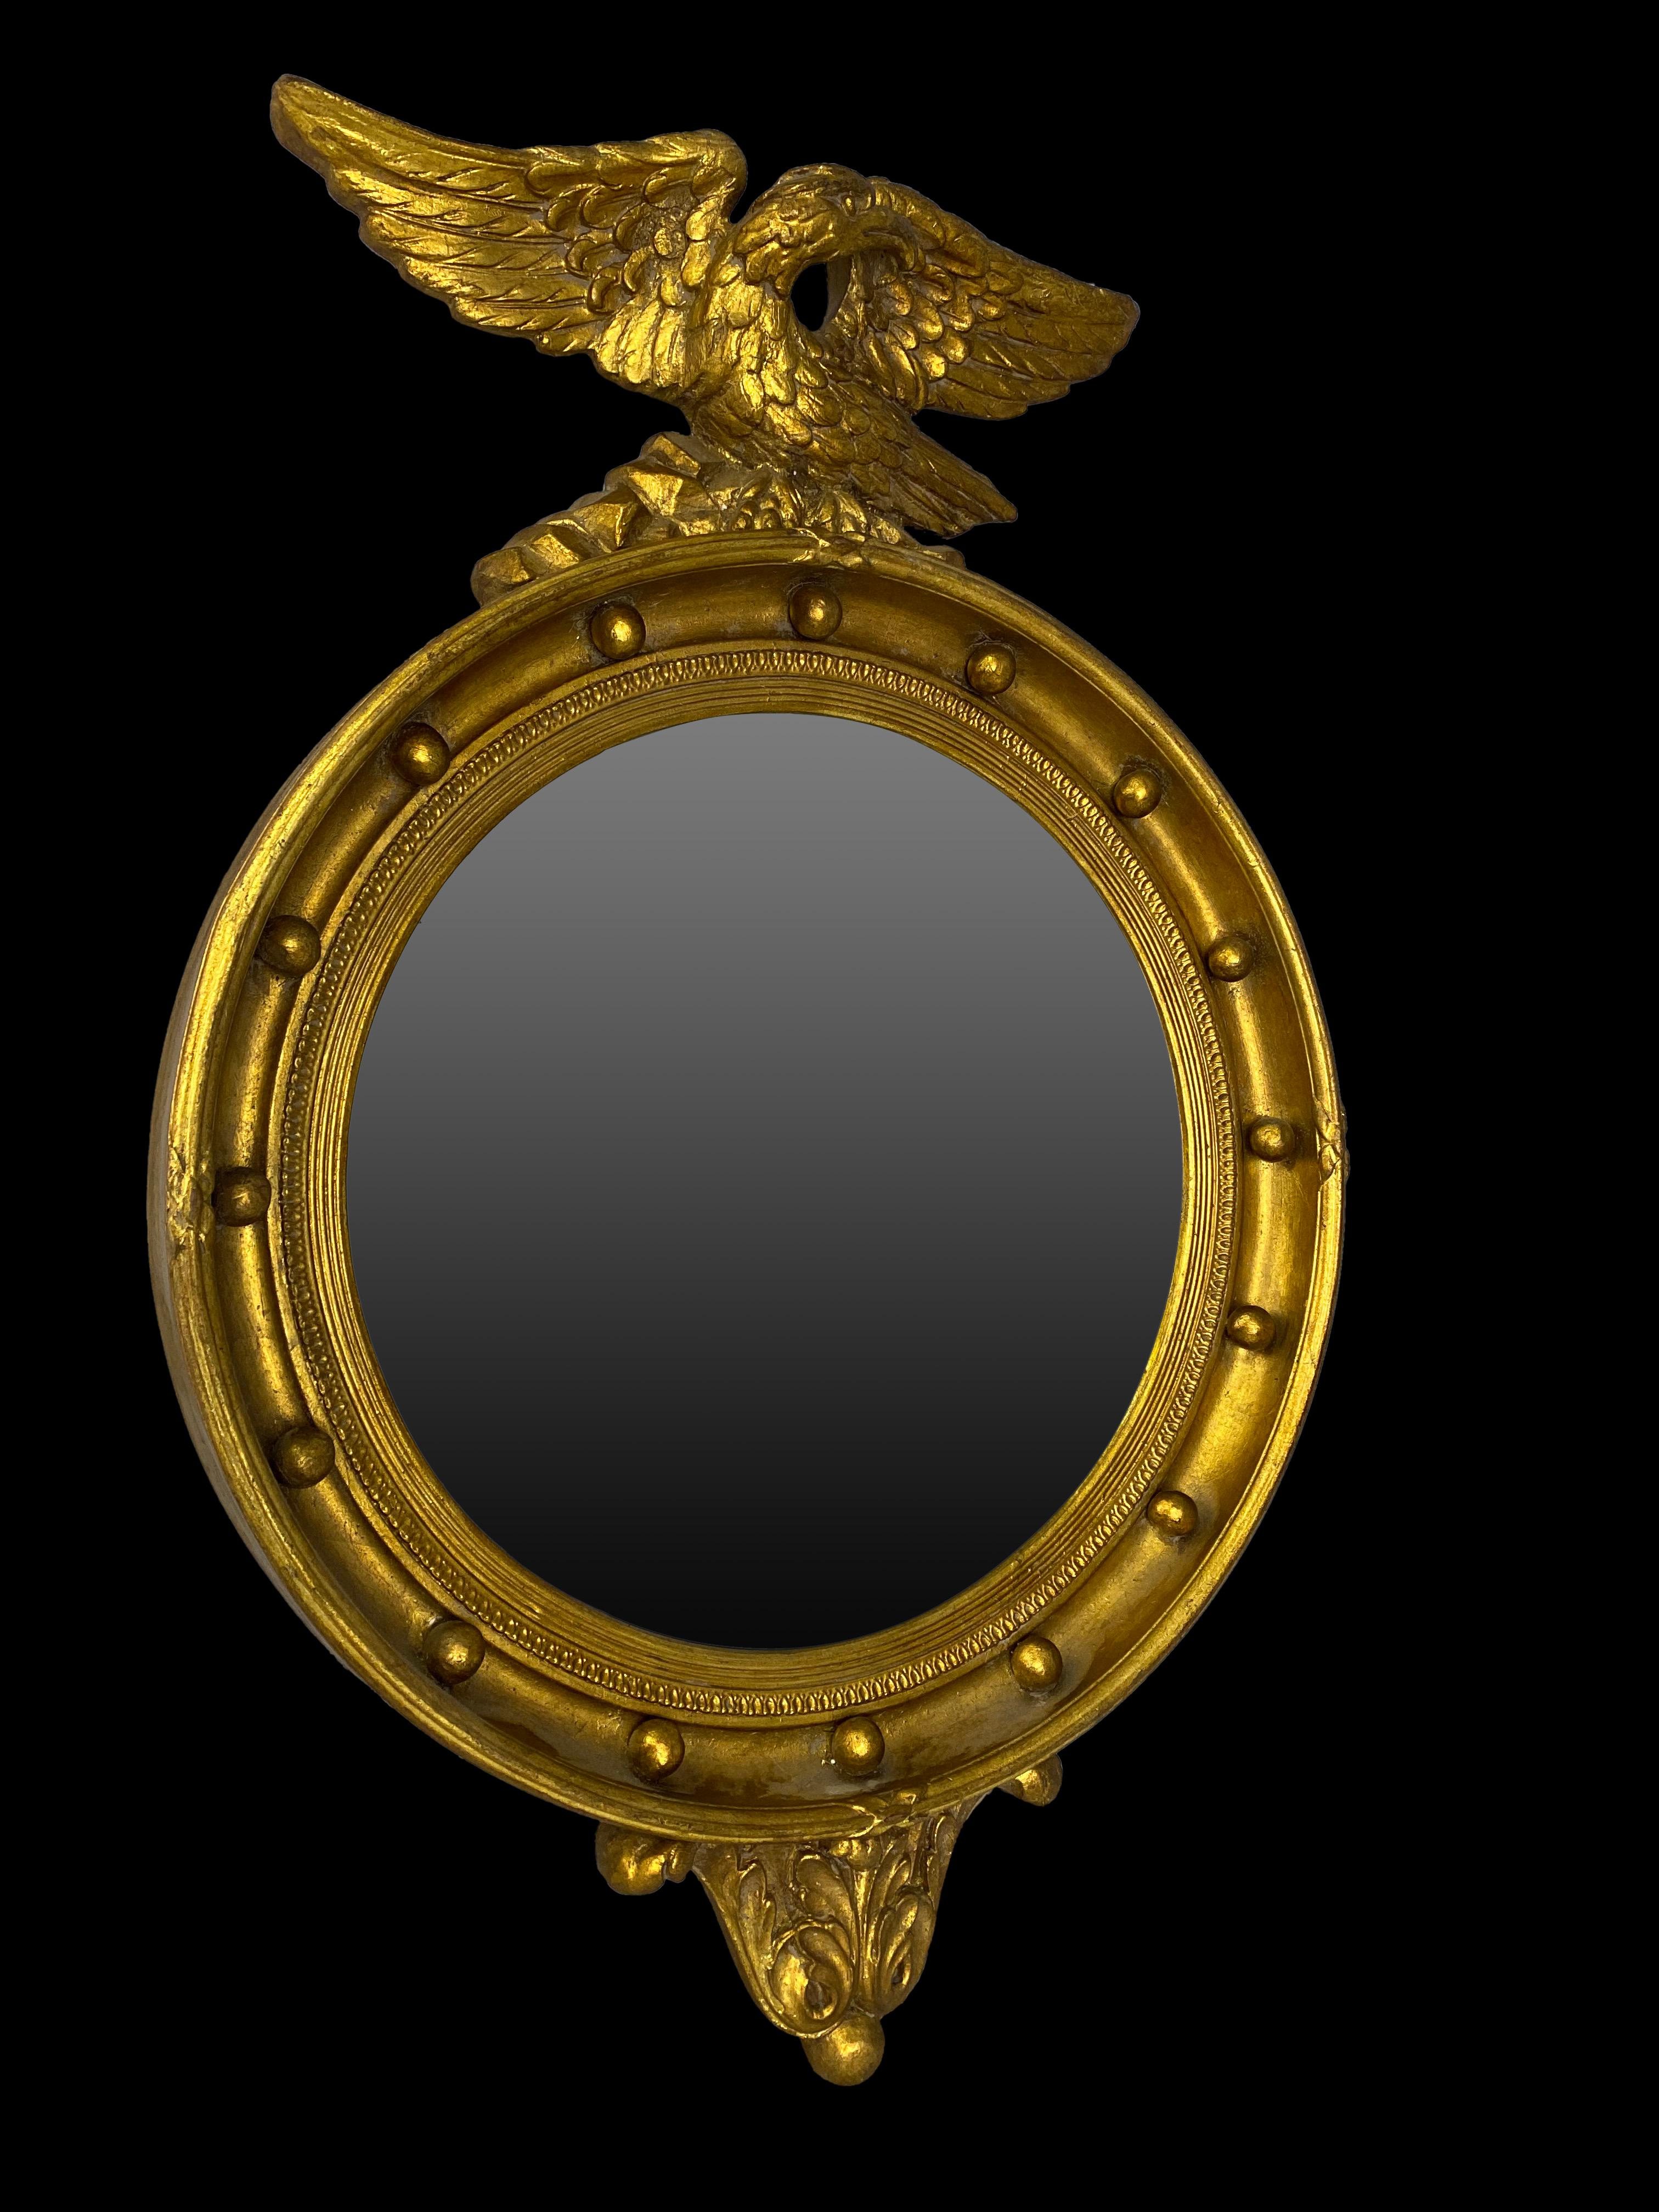 19th century oval mirror of Napoleon III period. Carved wood, covered with gold leaf finish. This piece has beautiful ornaments and an eagle on the top, wearing vintage glass, France, 1800s.

Dimensions (cm):
70 H, 50 W, 13 D.